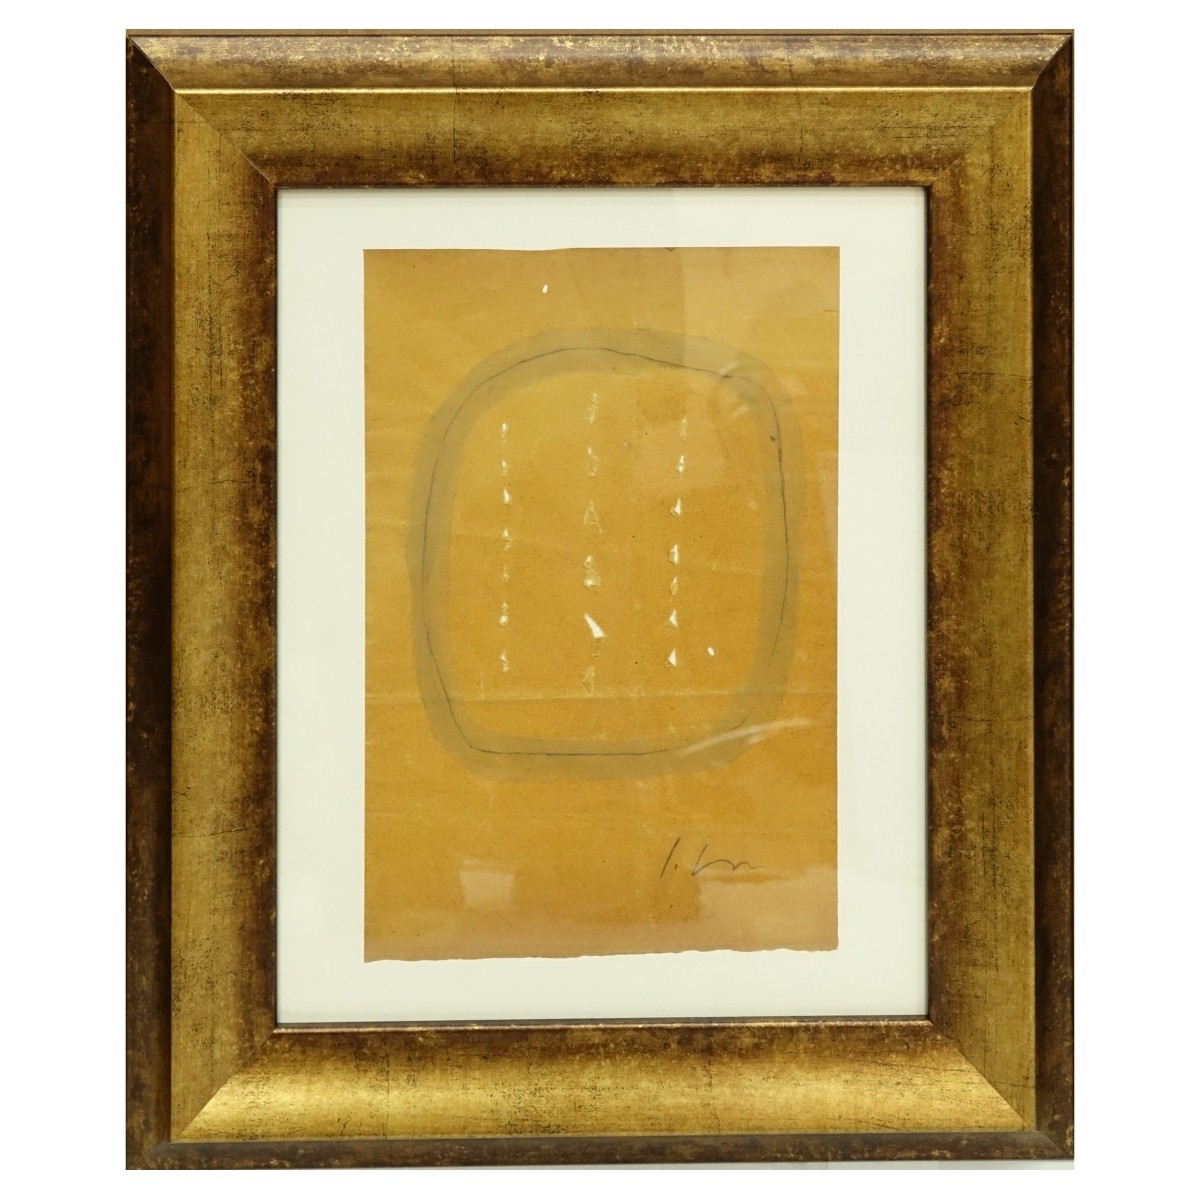 Attributed to: Lucio Fontana Ink and W/C On Paper